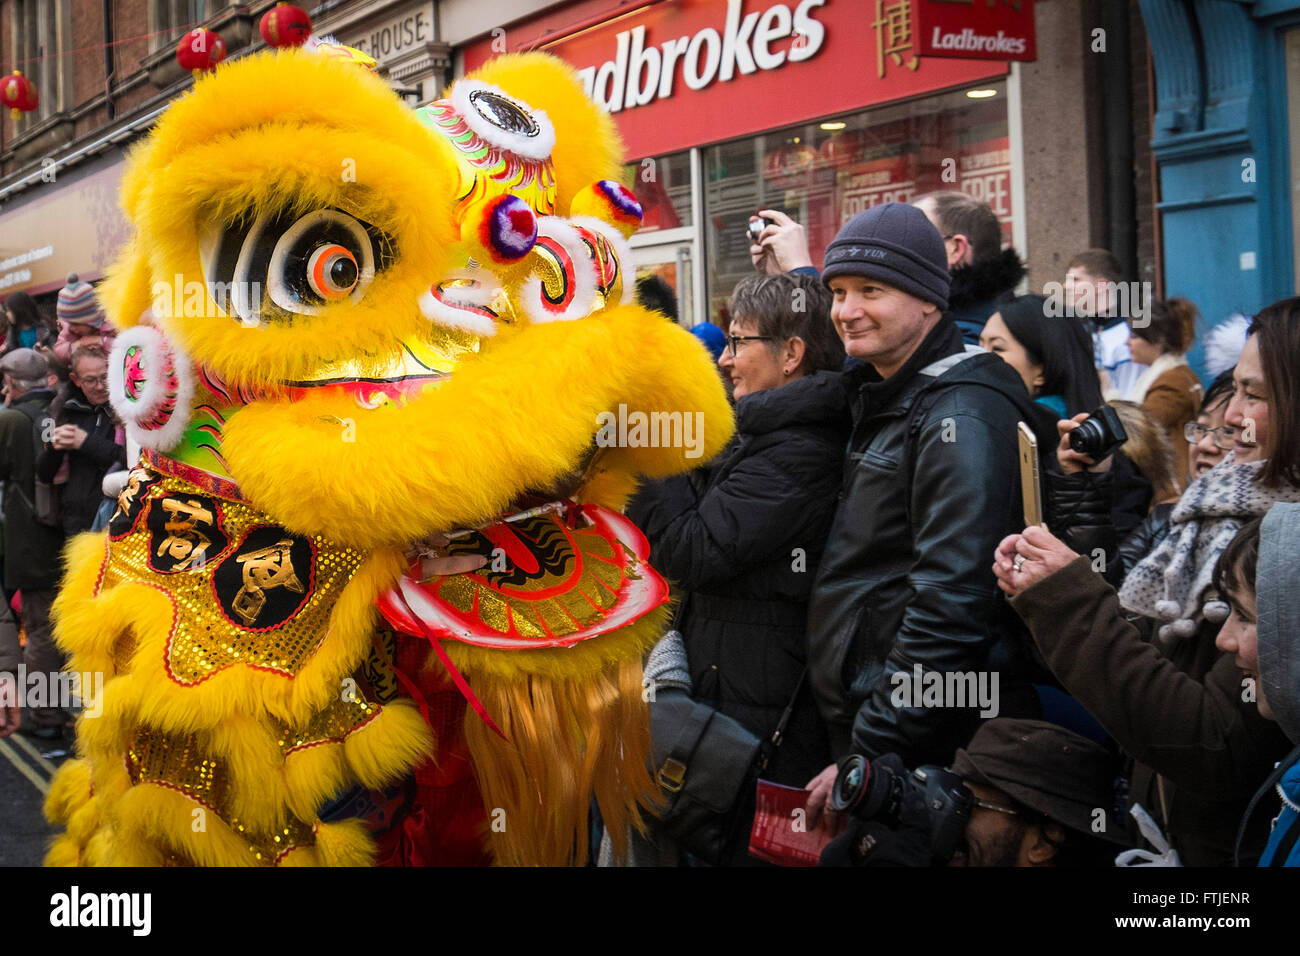 In London thousands of people celebrate the Chinese New Year 2016 - The Year of the Monkey. Stock Photo